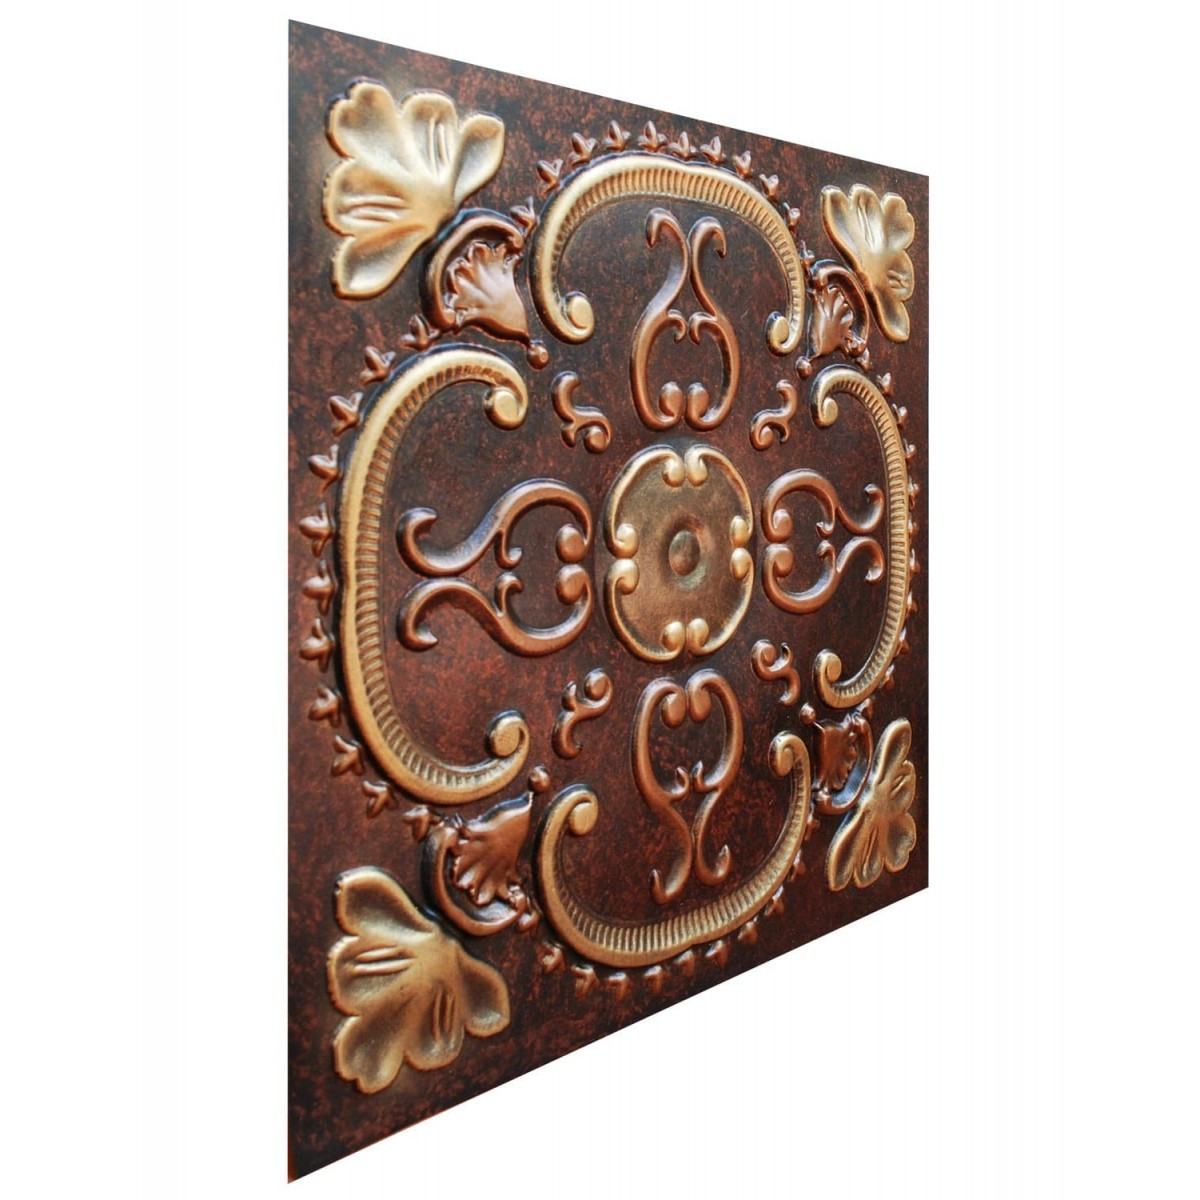 Alhambra - FAD Hand Painted Ceiling Tile - #CTF-010